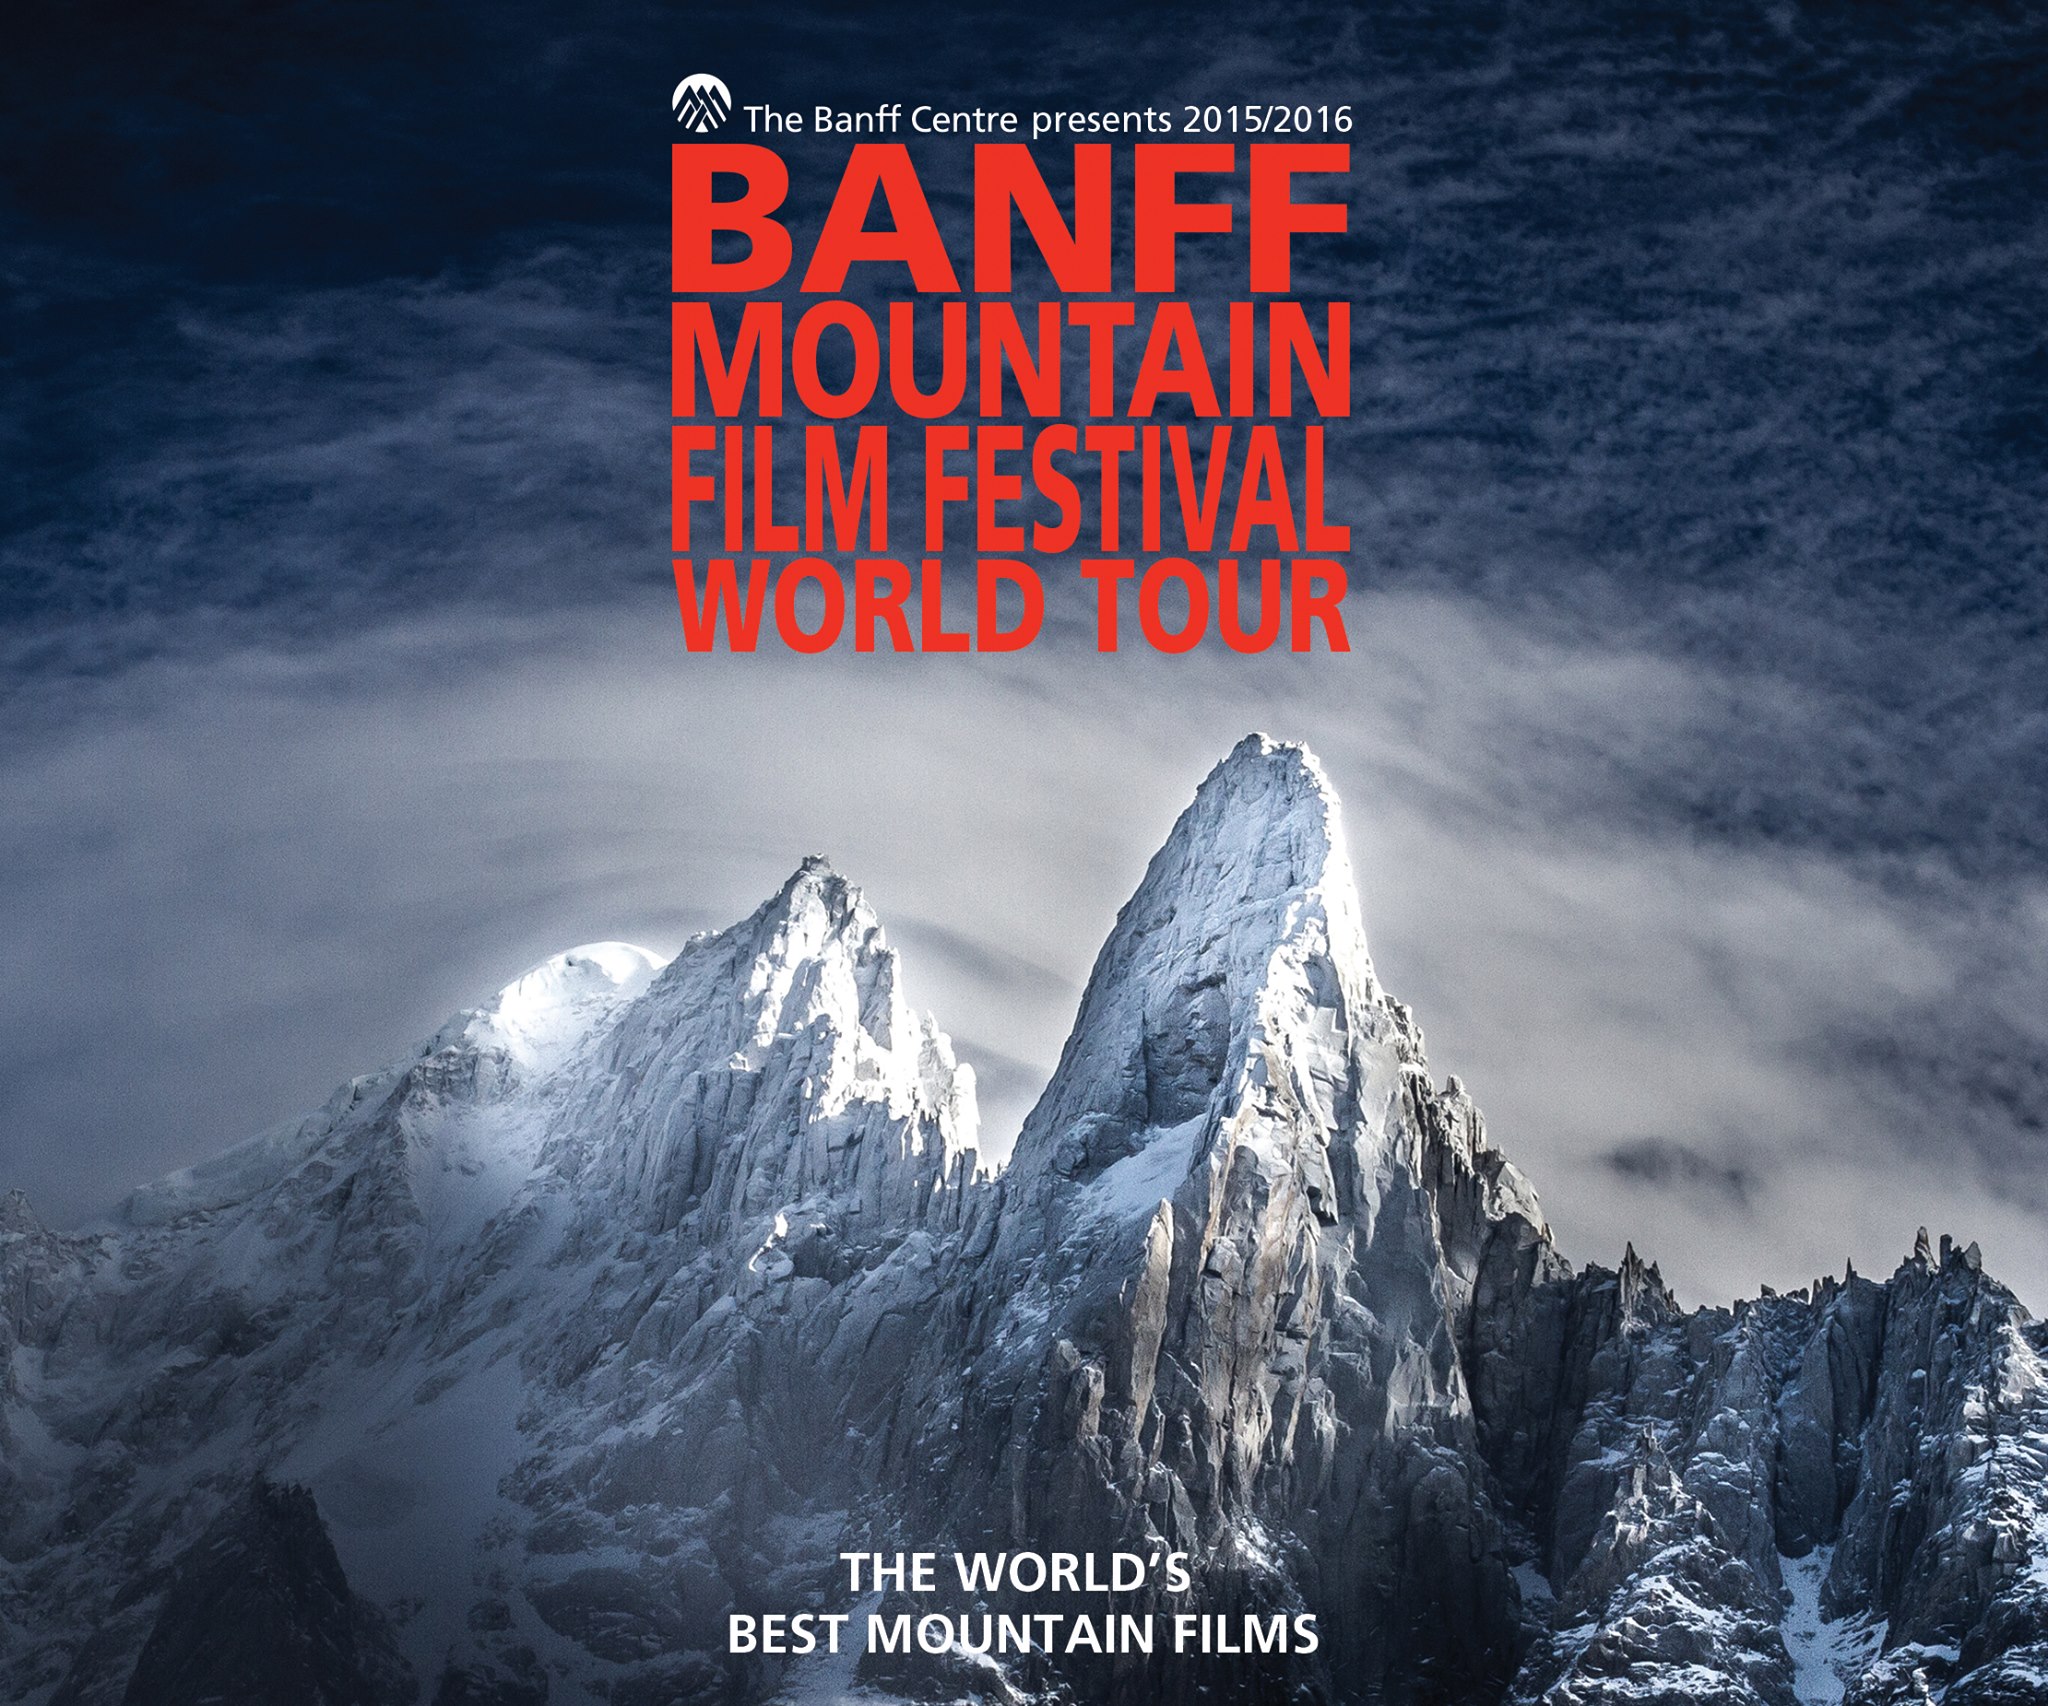 LIVEN UP YOUR WINTER WITH BANFF MOUNTAIN FILM FESTIVAL